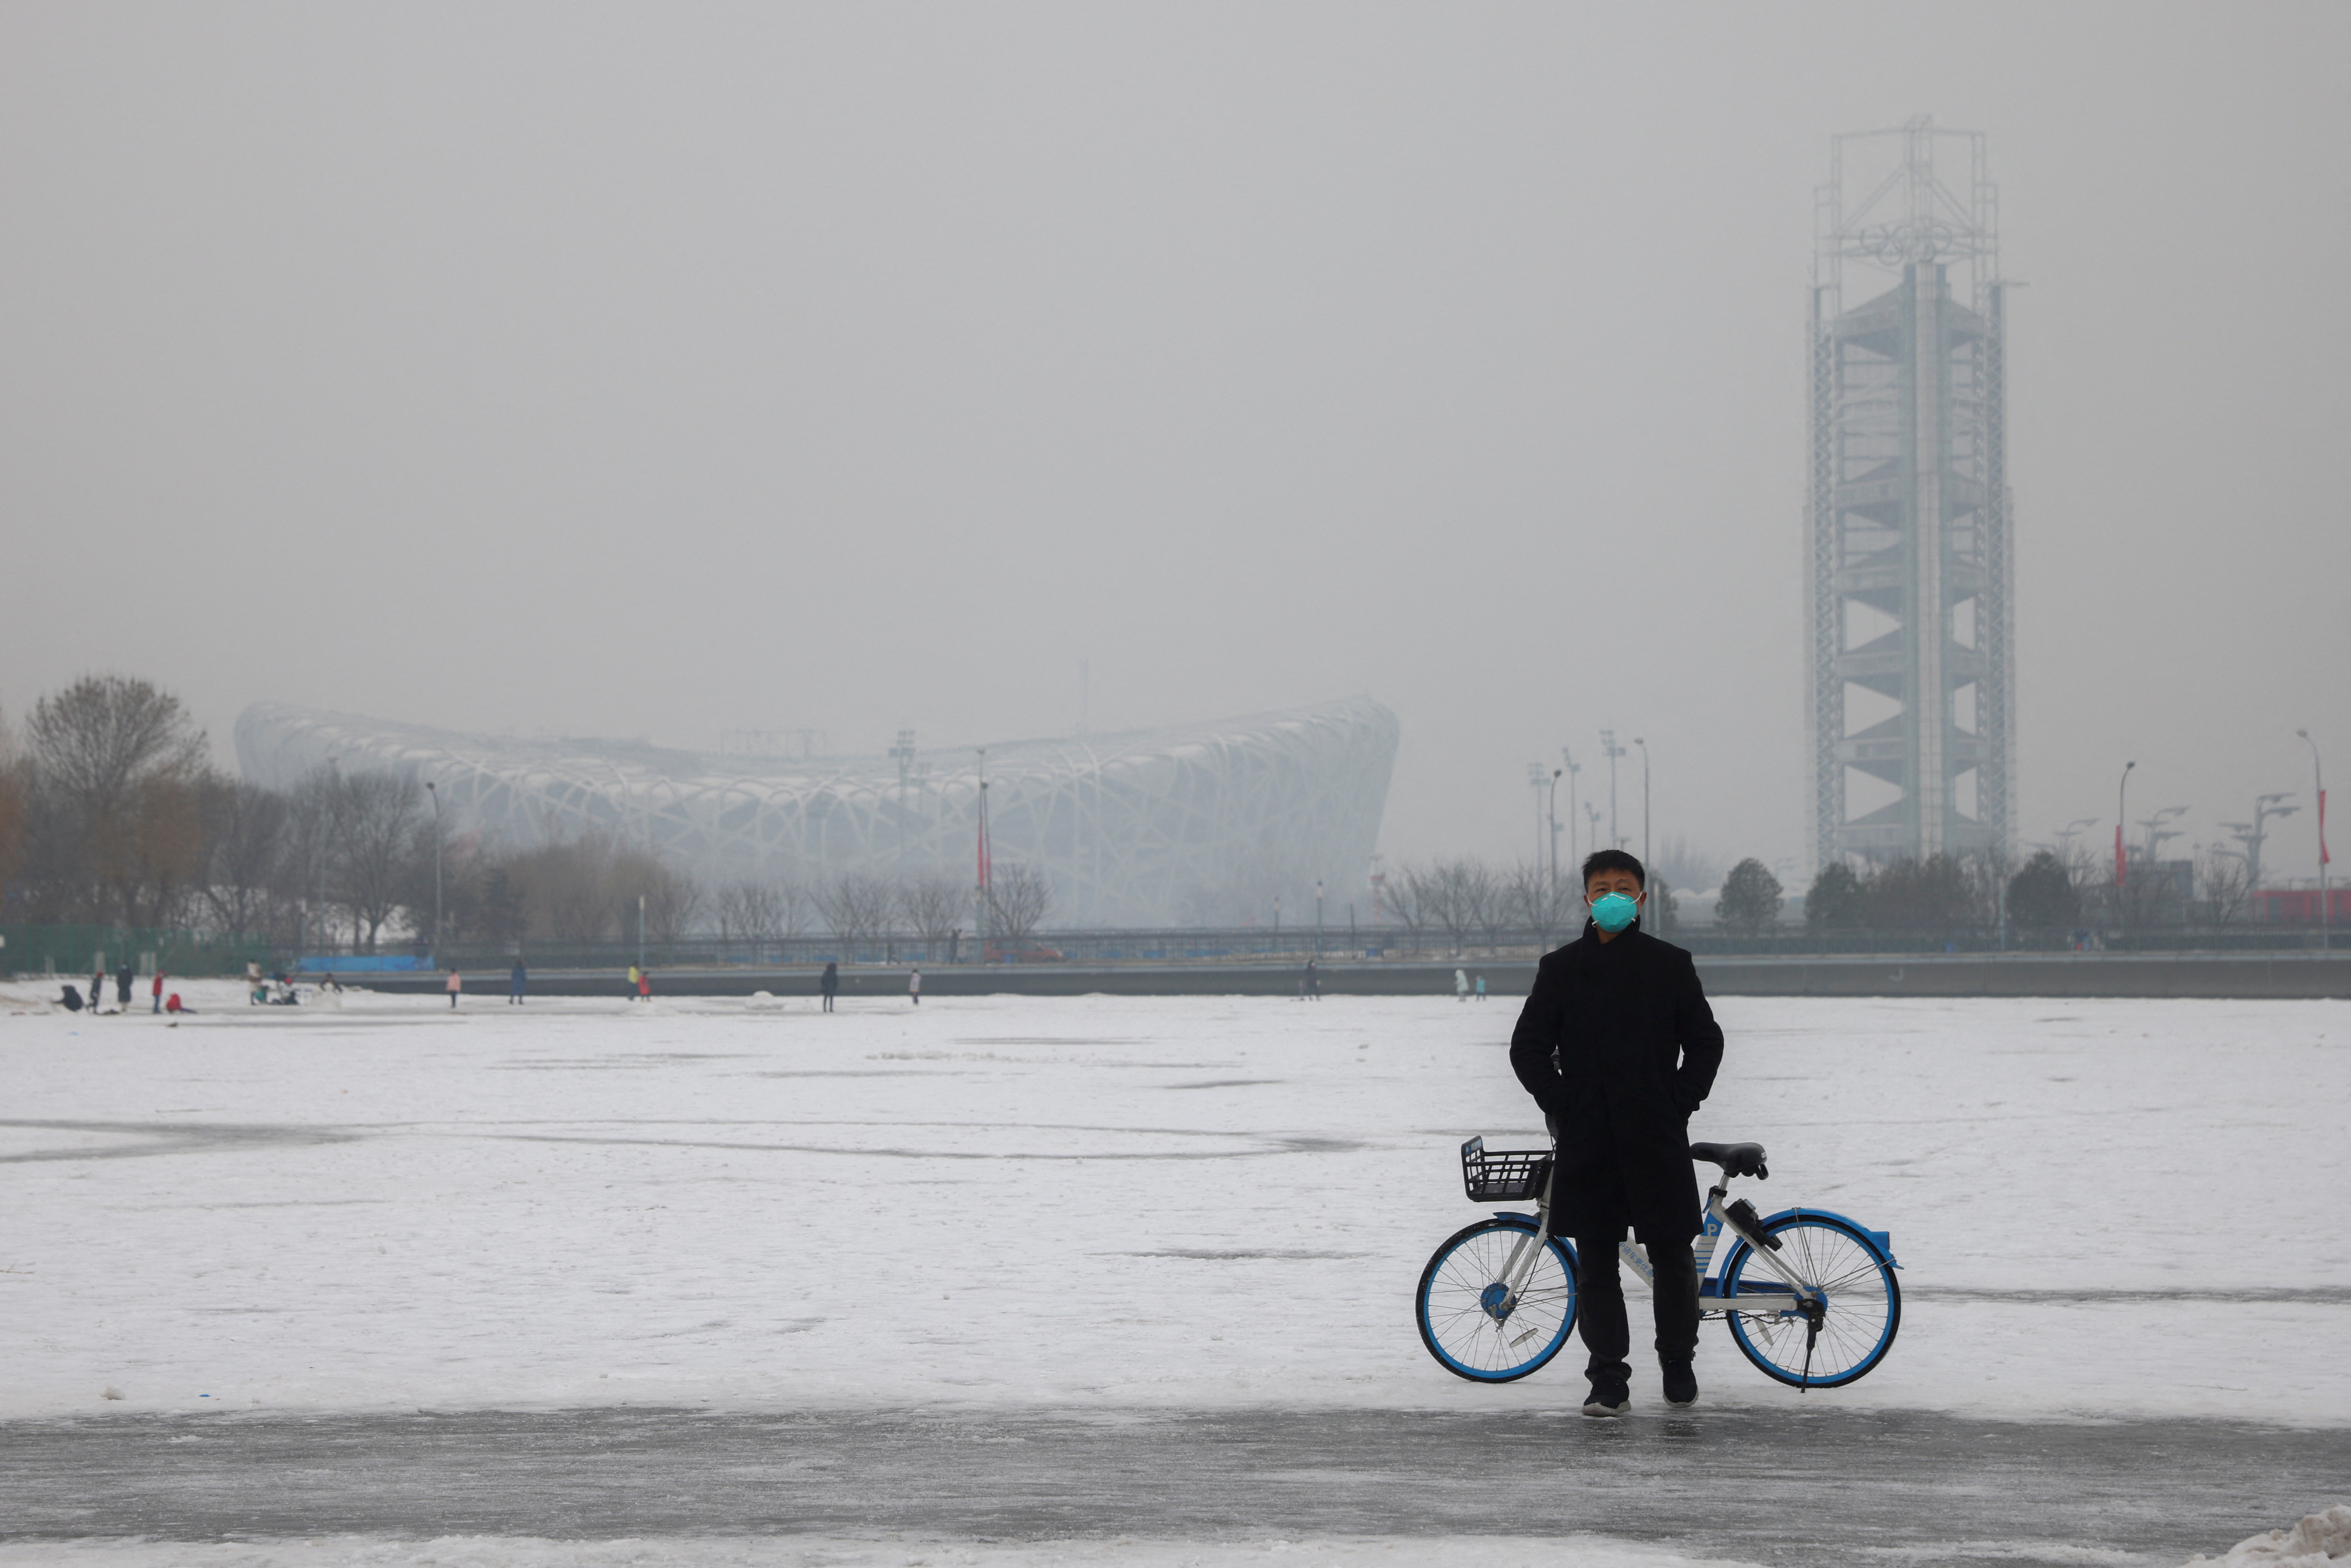 A man wearing a face mask stands on a frozen canal near the closed loop "bubble" surrounding venues of the Beijing 2022 Winter Olympics on a hazy day in Beijing, China, January 24, 2022.   REUTERS/Thomas Peter